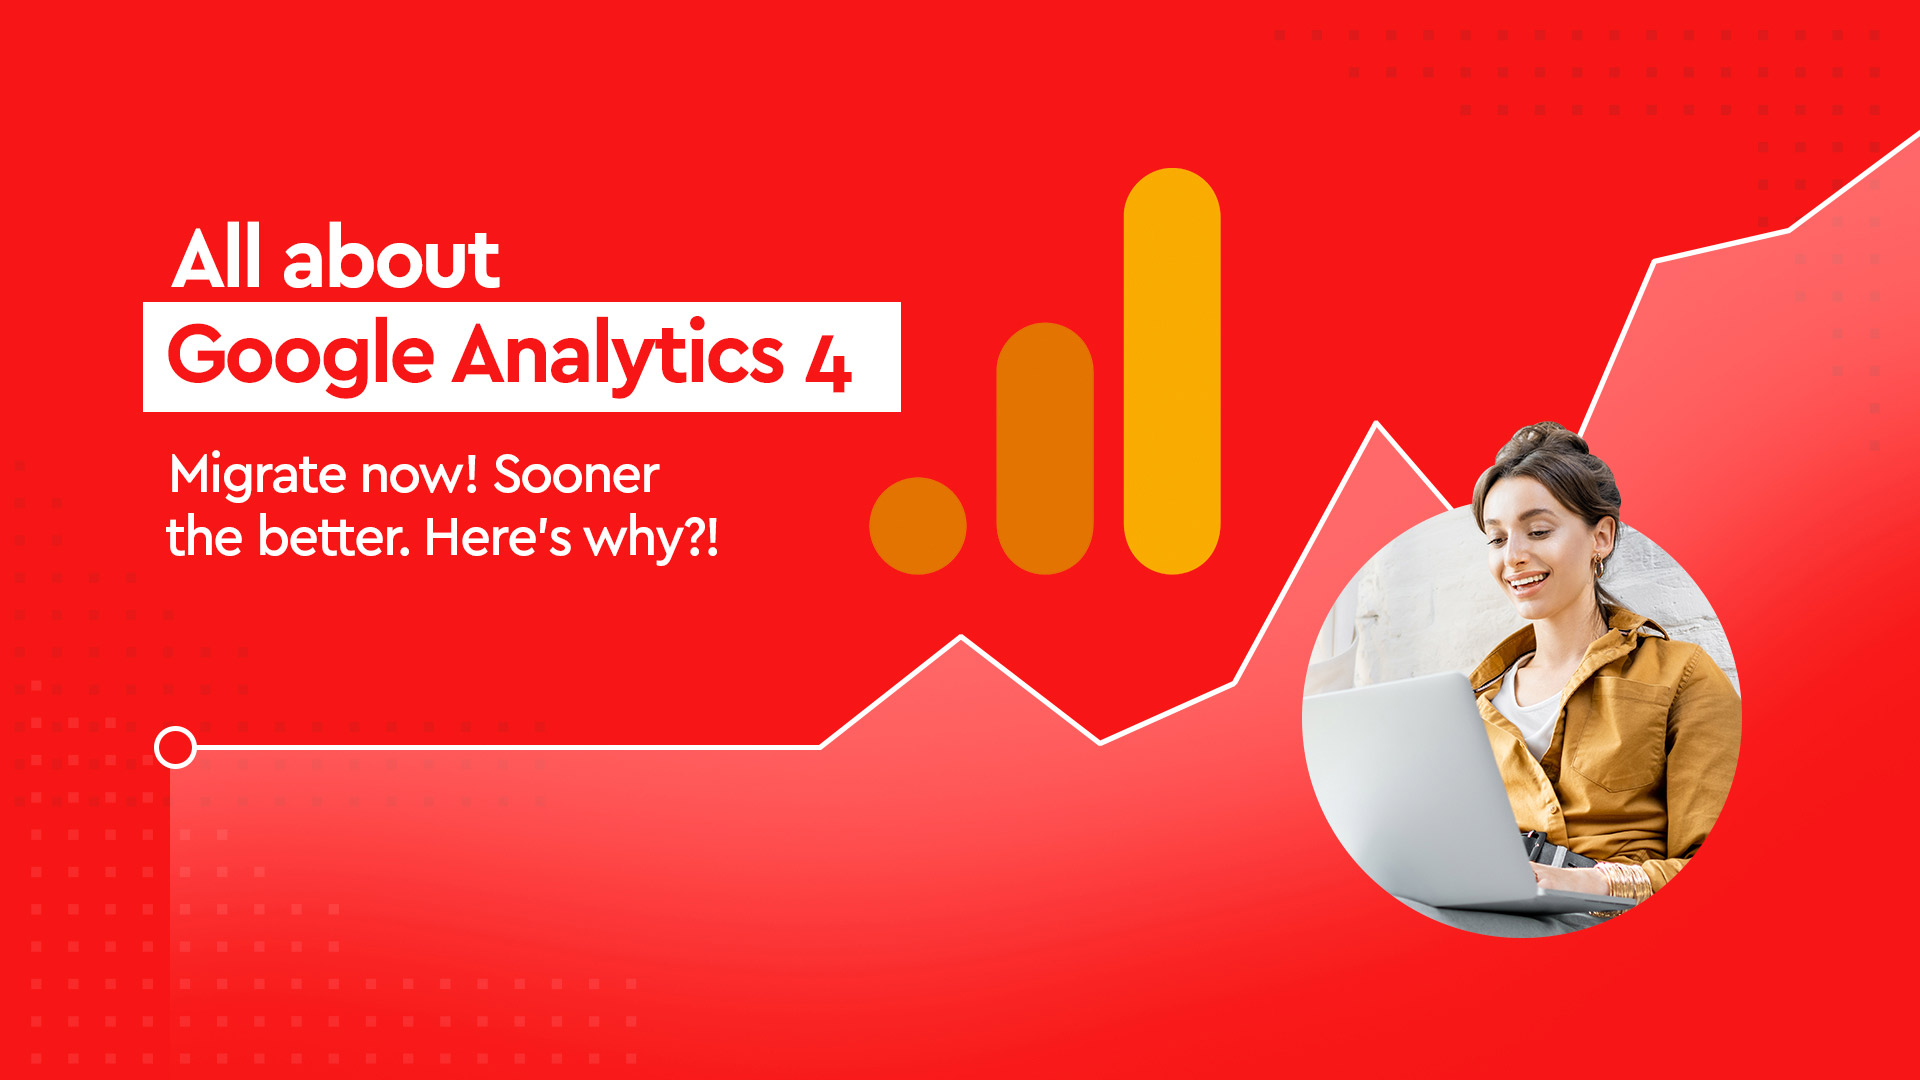 All about Google Analytics 4 – Migrate now! Sooner the better. Here’s why?!